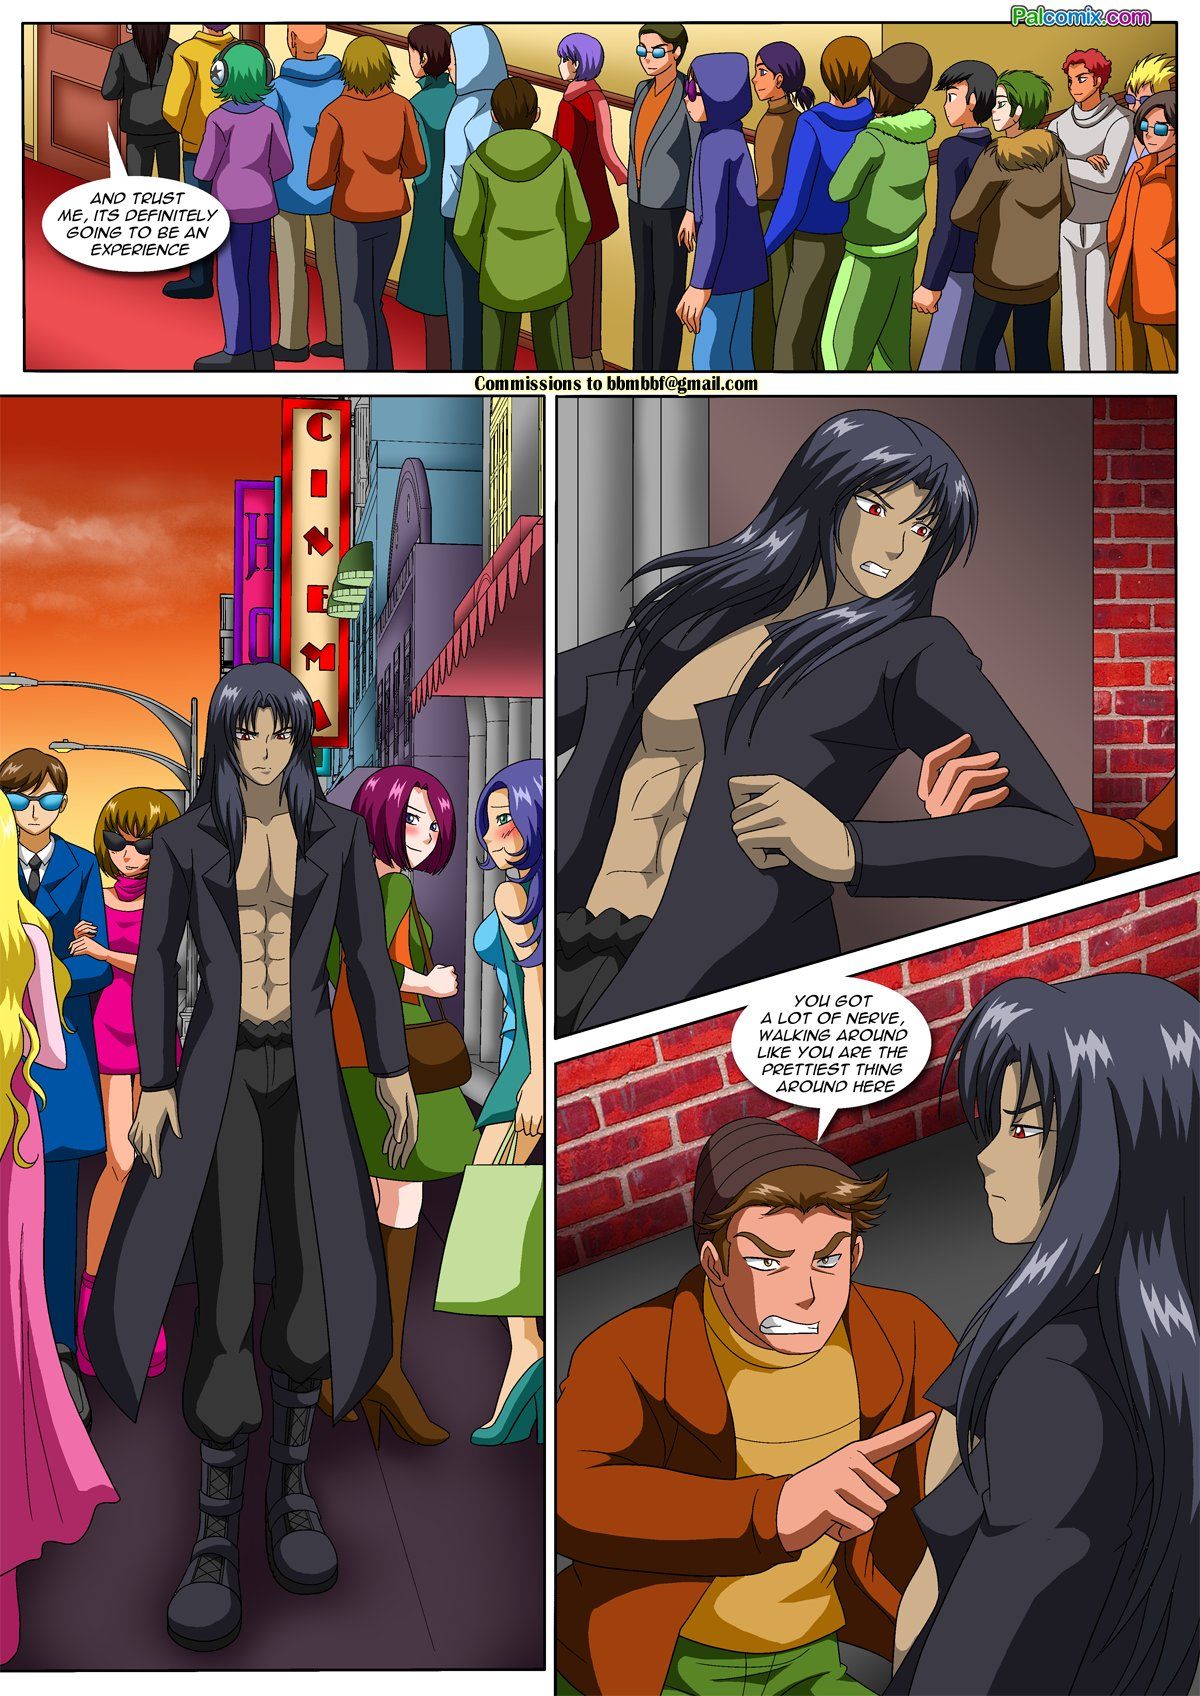 The Carnal Kingdom 6 - Angels and Demons page 17